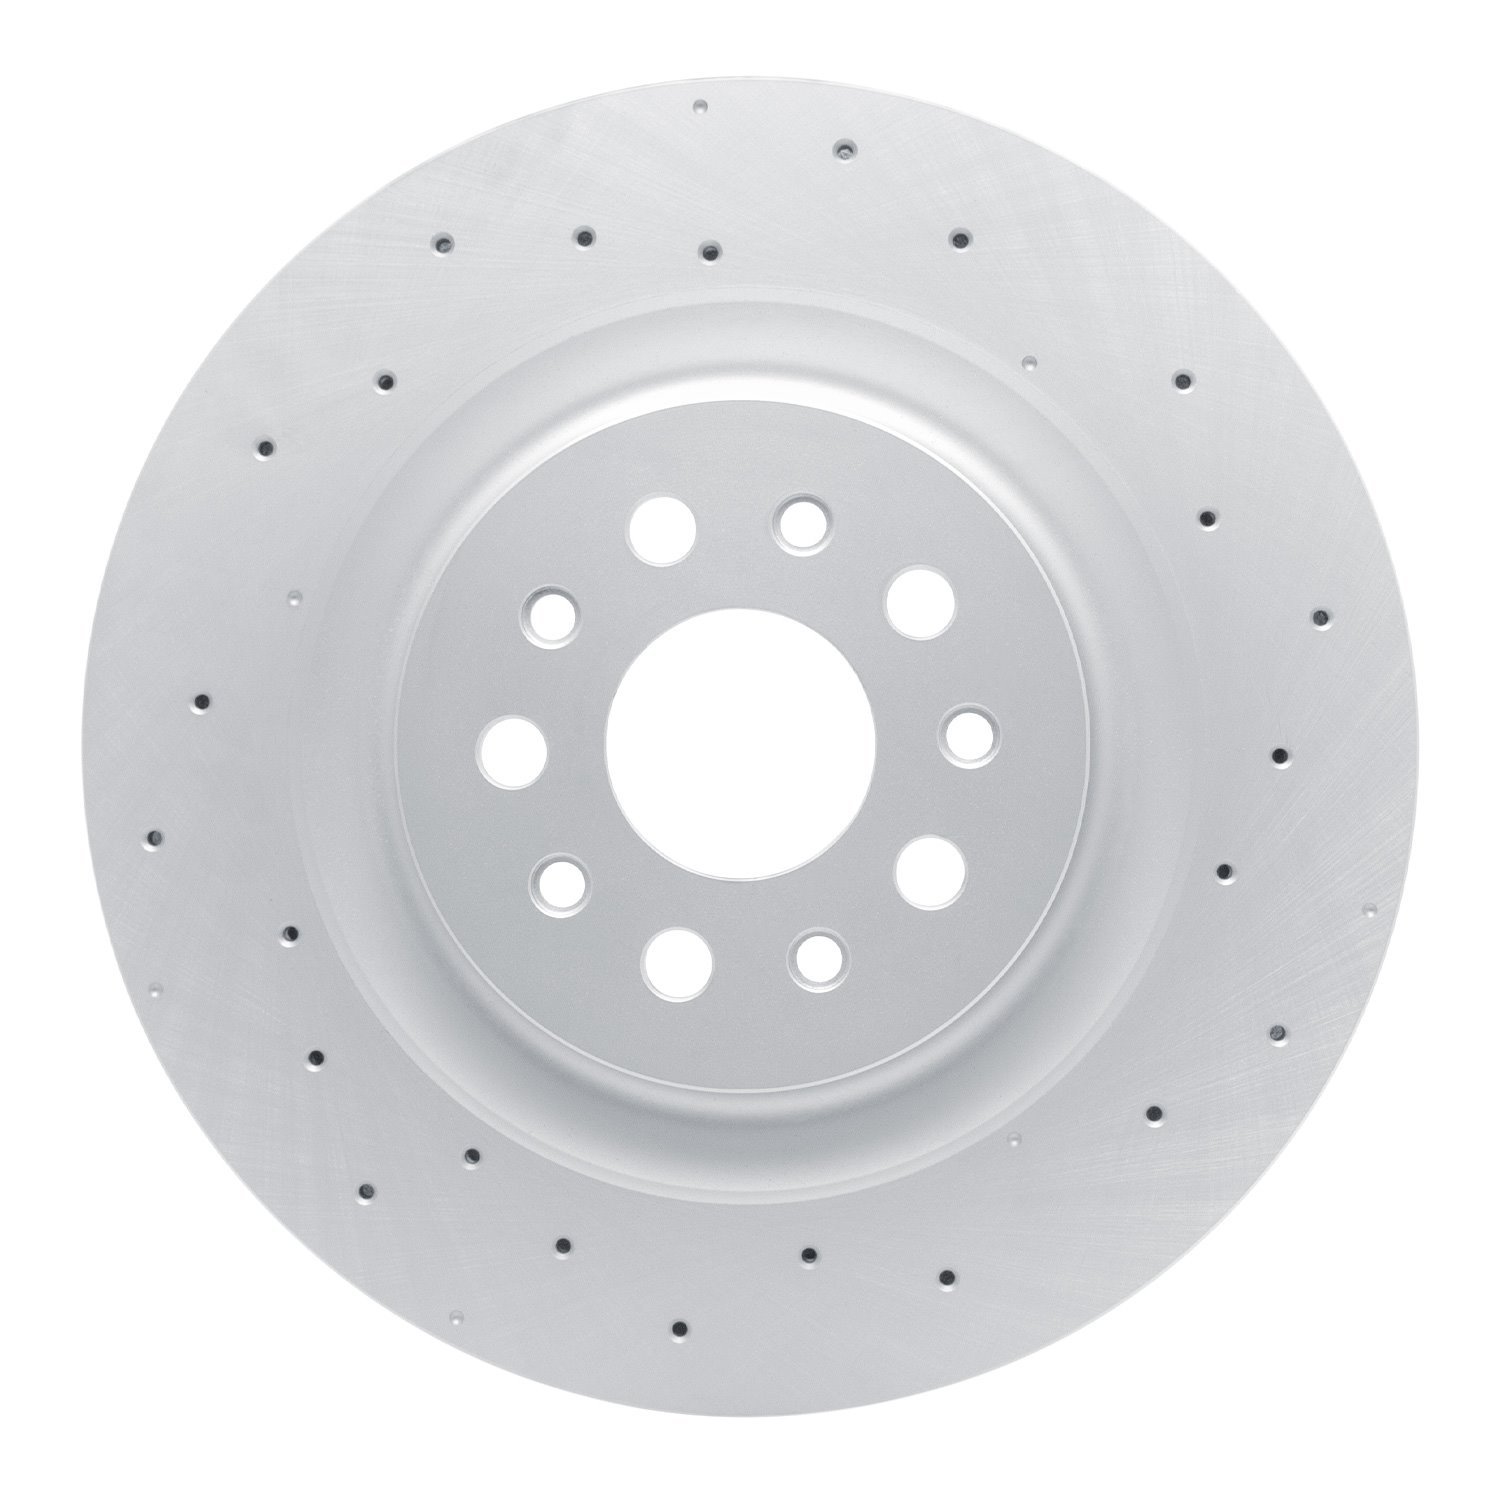 Hi-Carbon Alloy Geomet-Coated Drilled Rotor, 2014-2020 Maserati, Position: Rear